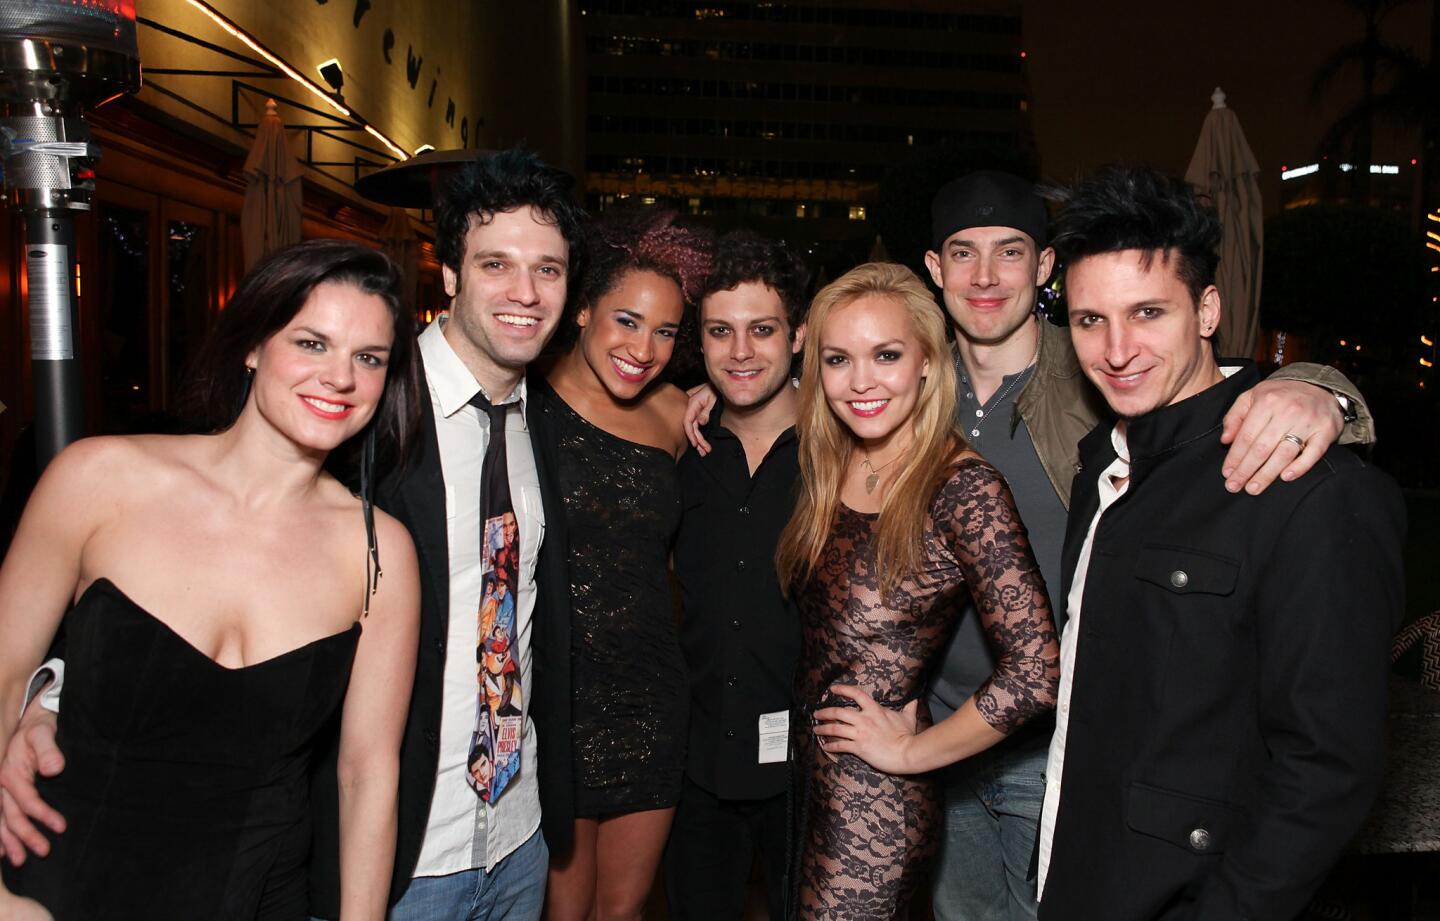 Cast members Leslie McDonel, Jake Epstein, Gabrielle McClinton, Van Hughes, Nicci Claspell, Scott J. Campbell and Joshua Kobak pose during the party for the opening night performance of Green Day's "American Idiot" at Center Theatre Group's Ahmanson Theatre on March 14, 2012 in Los Angeles, California.